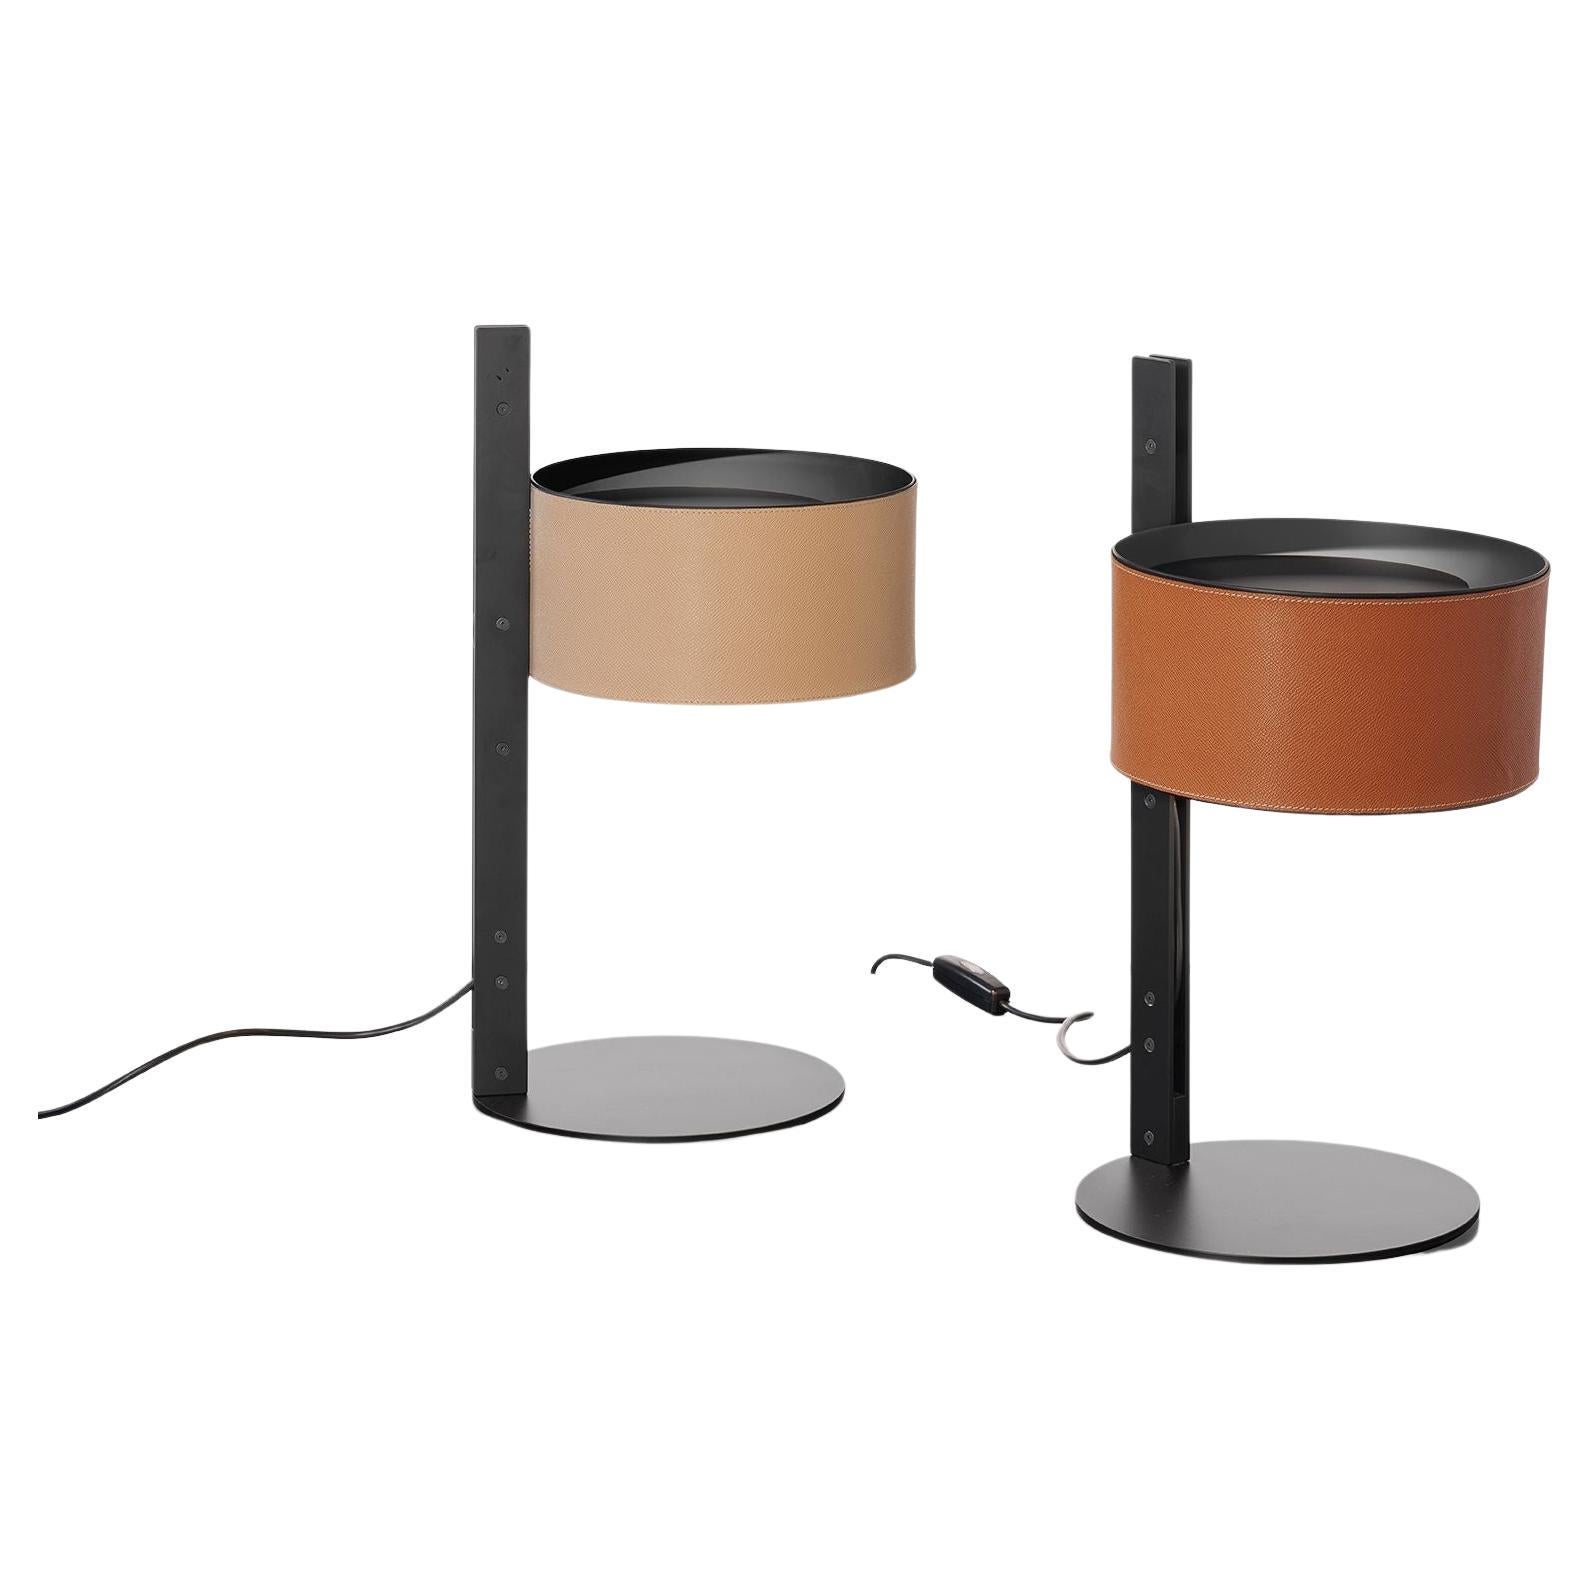 Set of Two Victor Vasilev Metal and Leather Table Lamps by Oluce